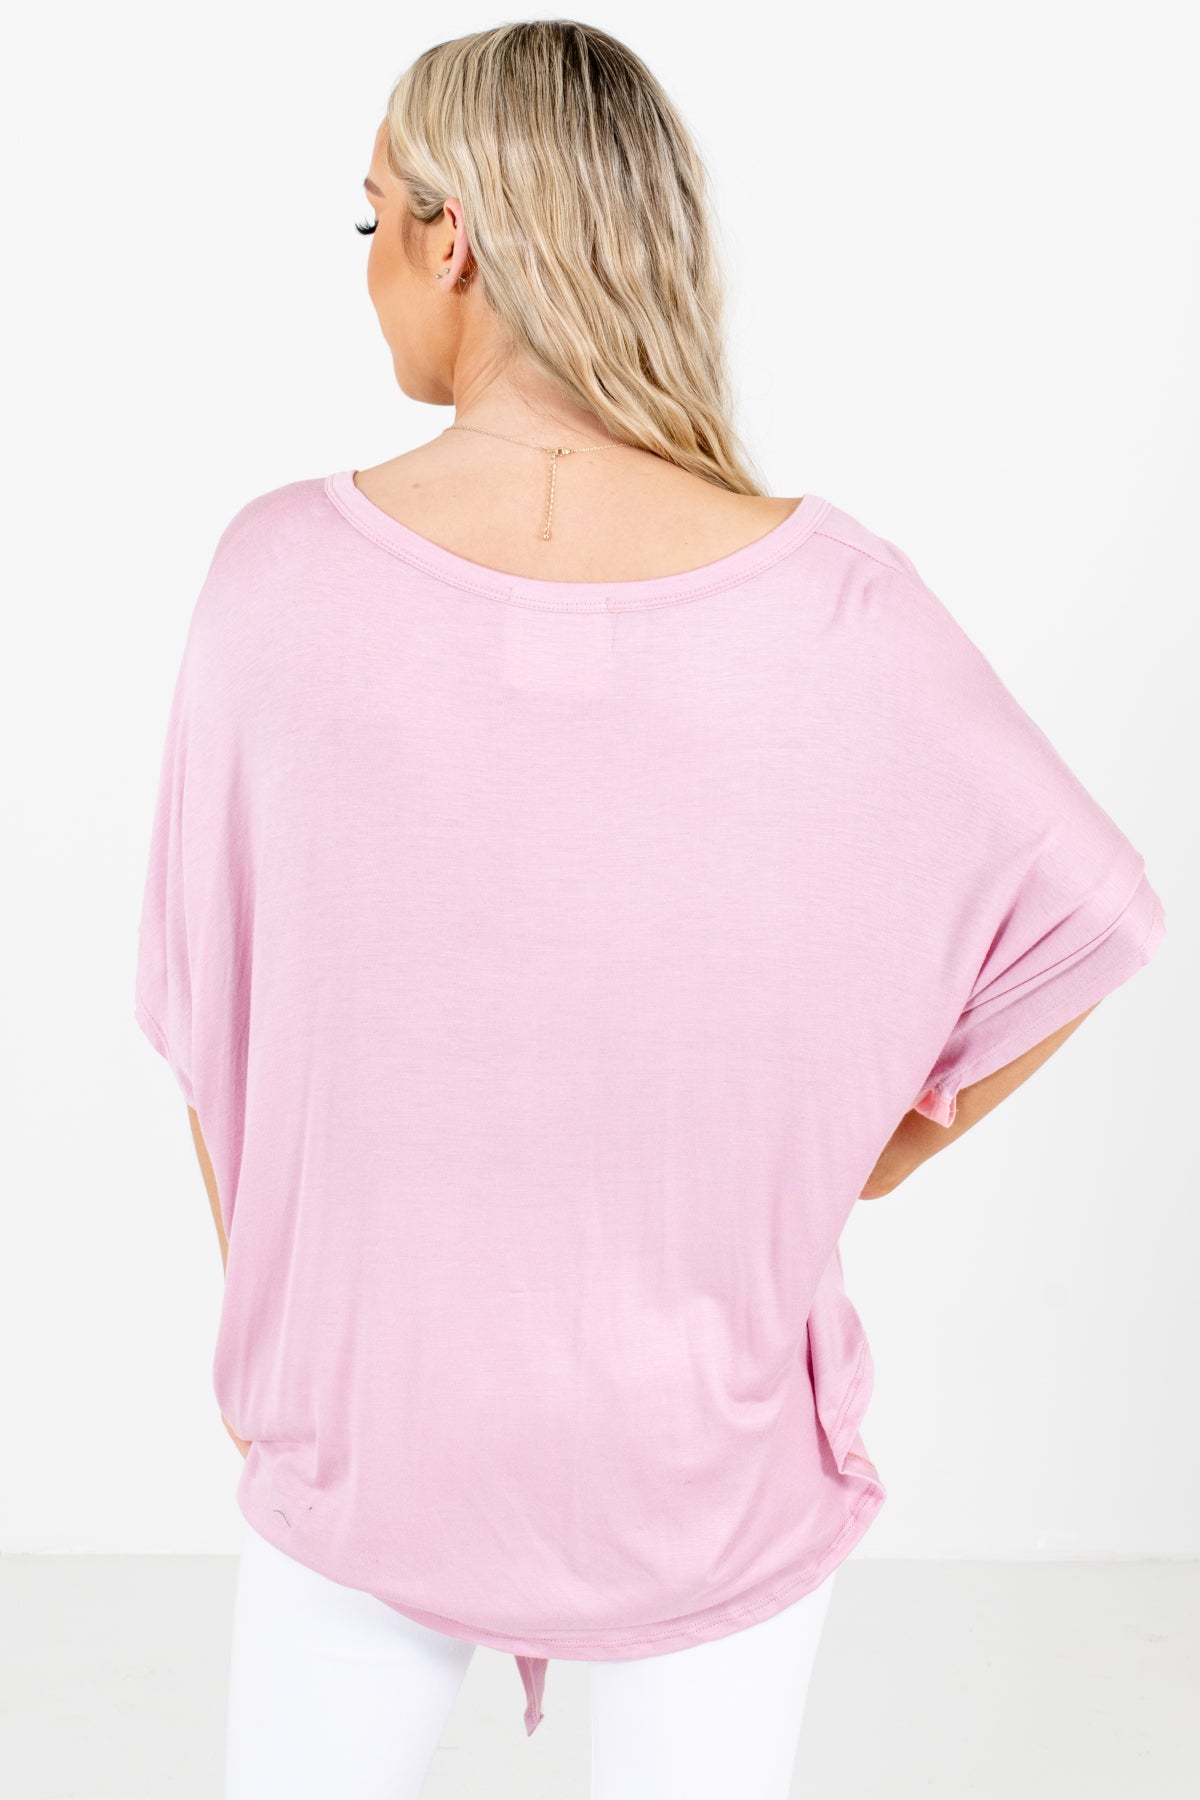 Women's Pink Button-Up Front Boutique Top